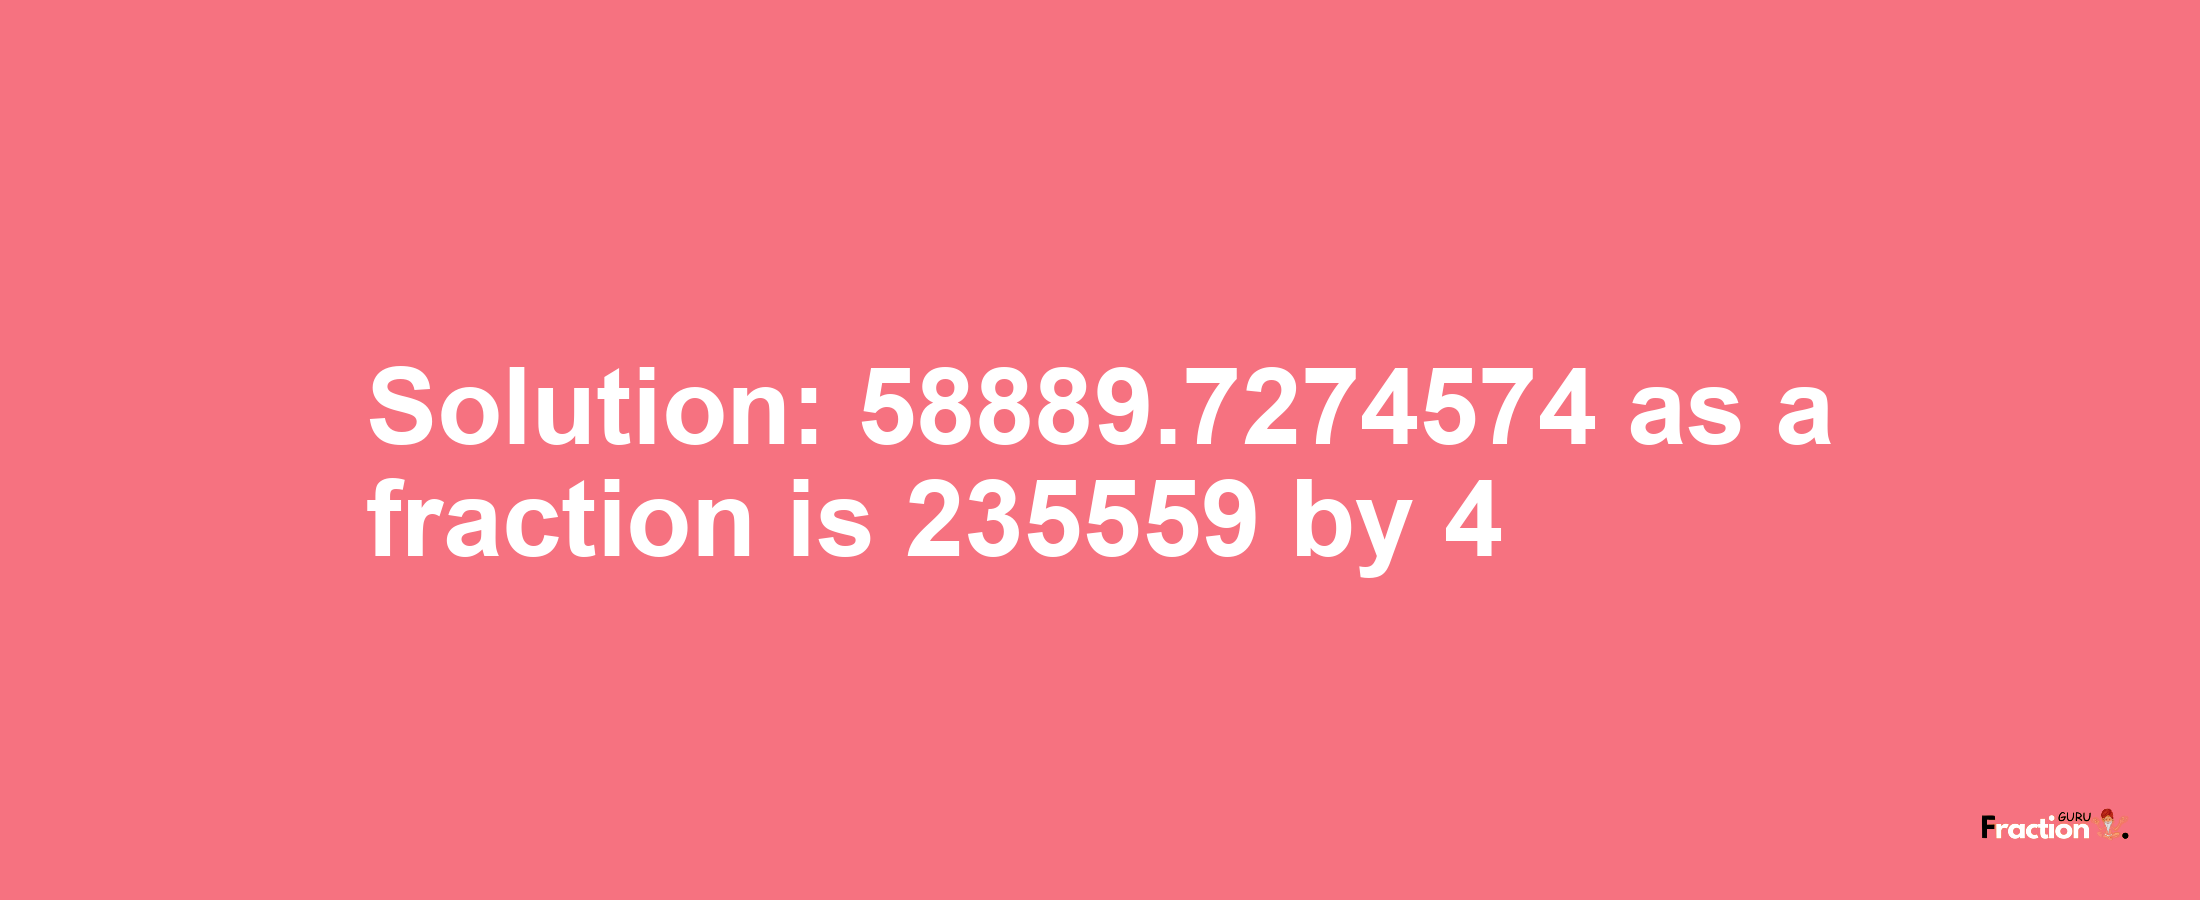 Solution:58889.7274574 as a fraction is 235559/4